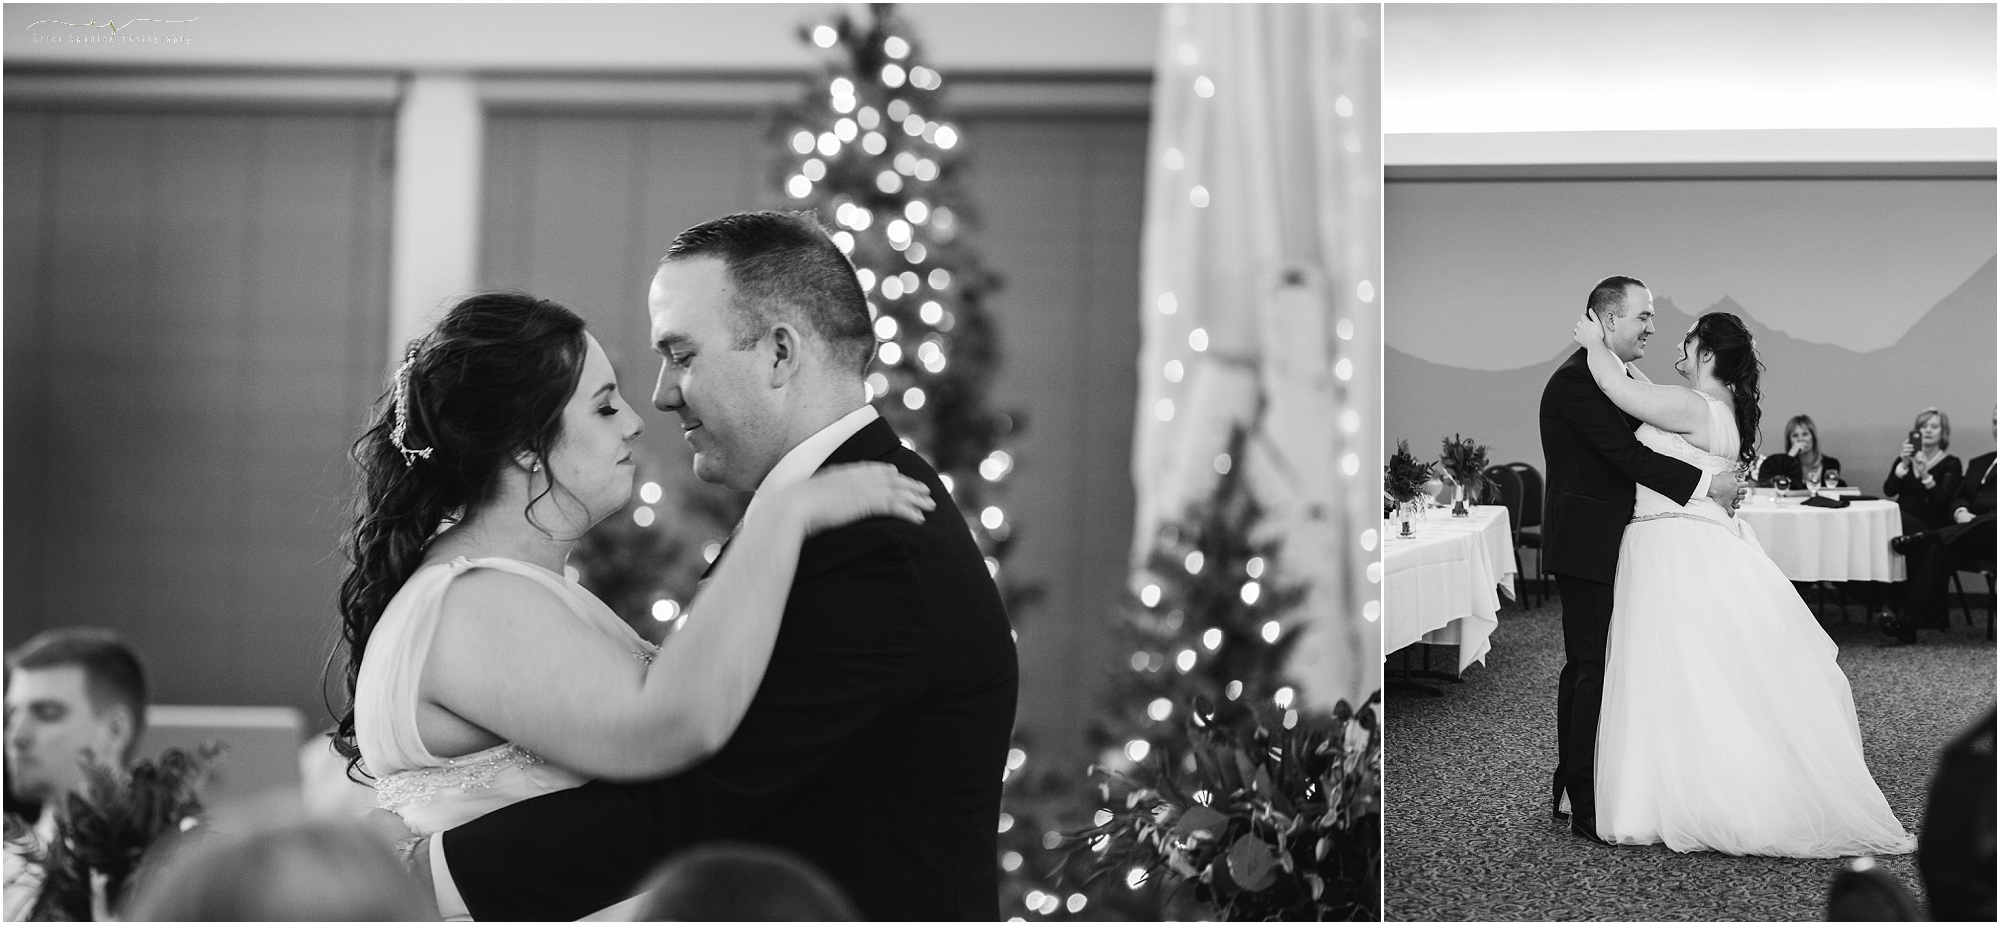 An intimate and romantic first dance at this winter woodland wedding in Bend, OR.